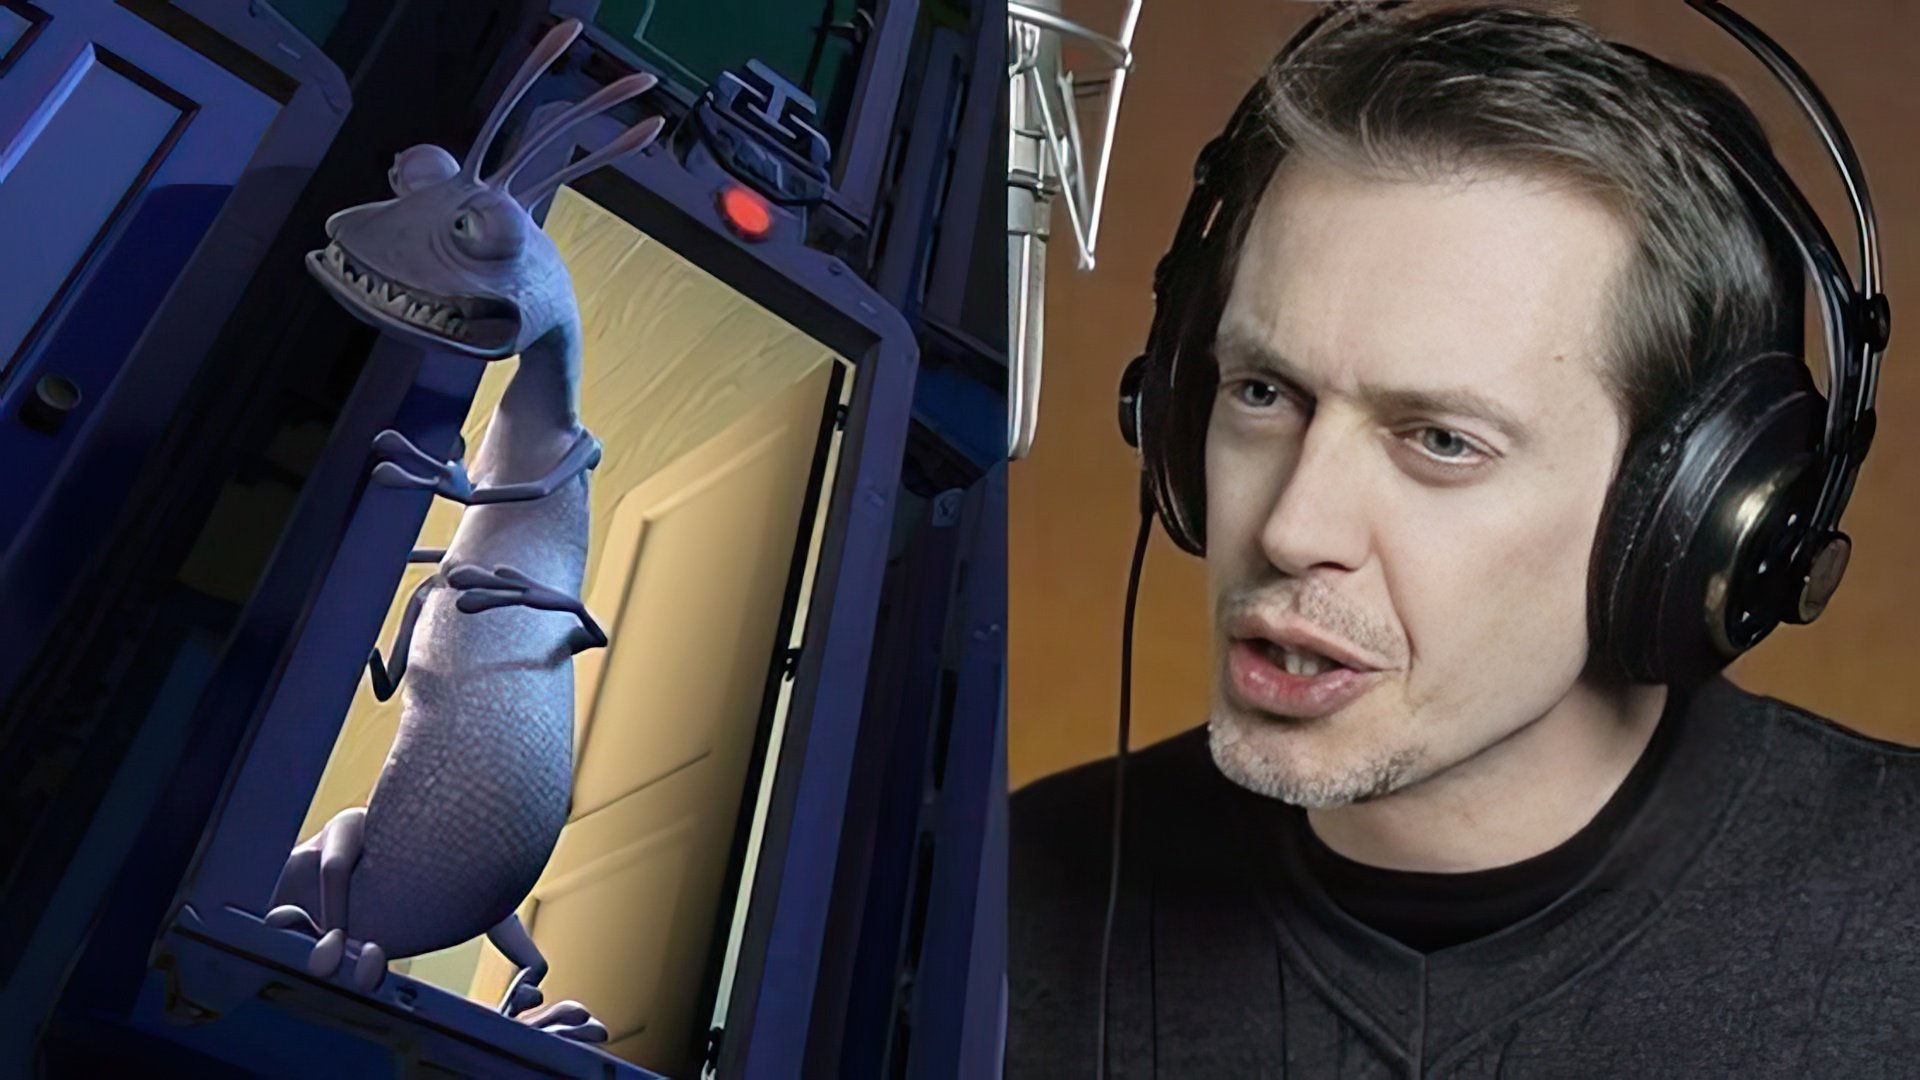 Steve Buscemi presented his voice to Randall Boggs from the Monsters, Inc